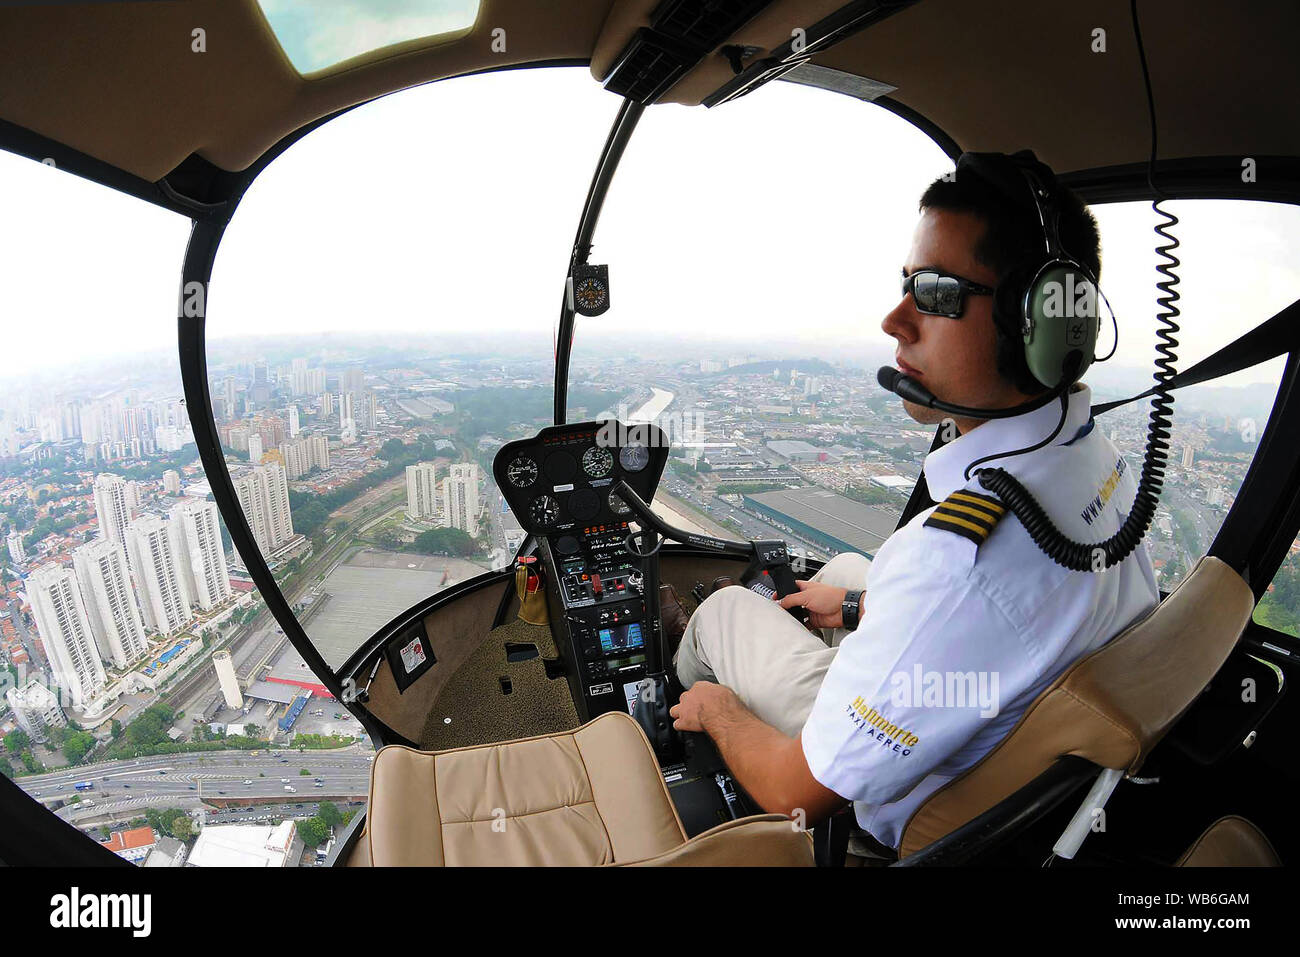 São Paulo, Brazil, February 10, 2014. Air taxi helicopter pilot flying in the city of São Paulo Stock Photo